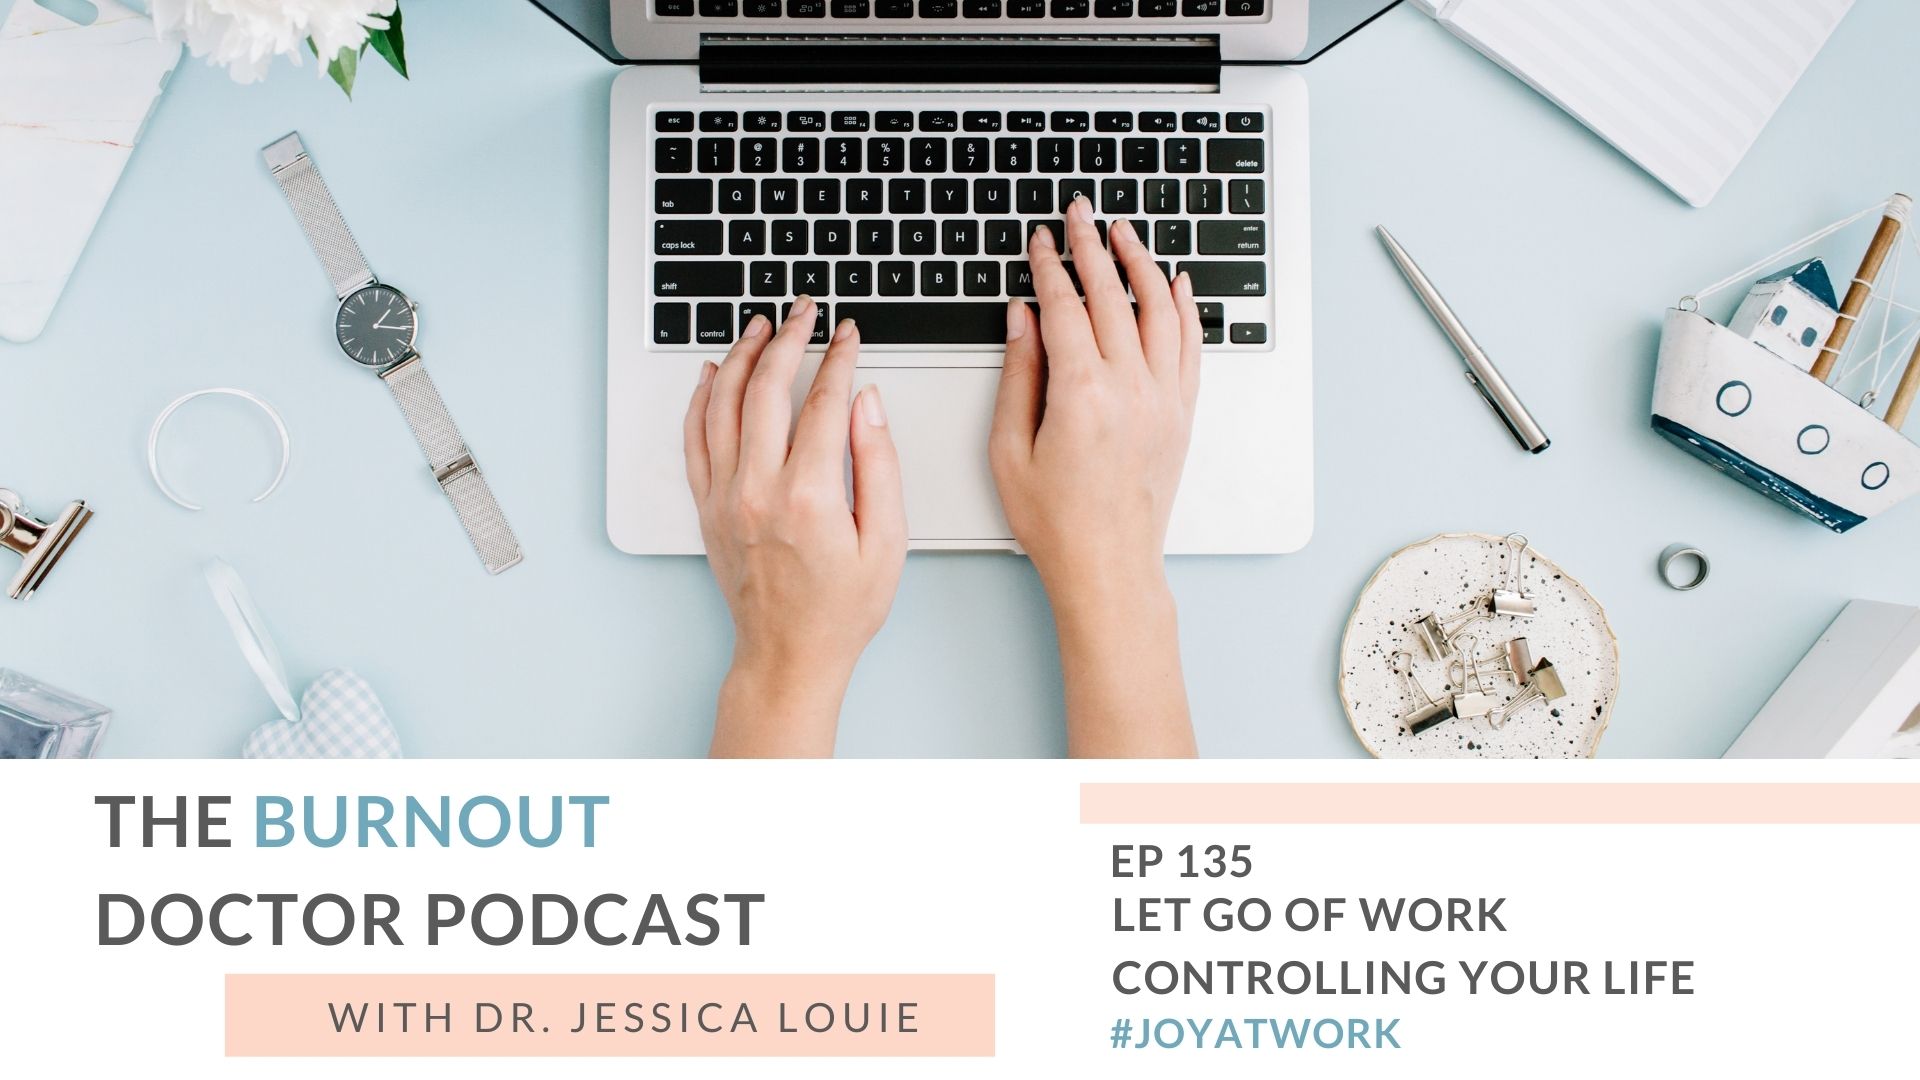 Stop letting work control your life. Let go of work controlling your life. Stop being on 24 hours a day 7 days a week for work and email overwhelm. Burnout at work in pharmacy and healthcare. The Burnout Doctor Podcast with Dr. Jessica Louie. Keynote speaker on burnout.